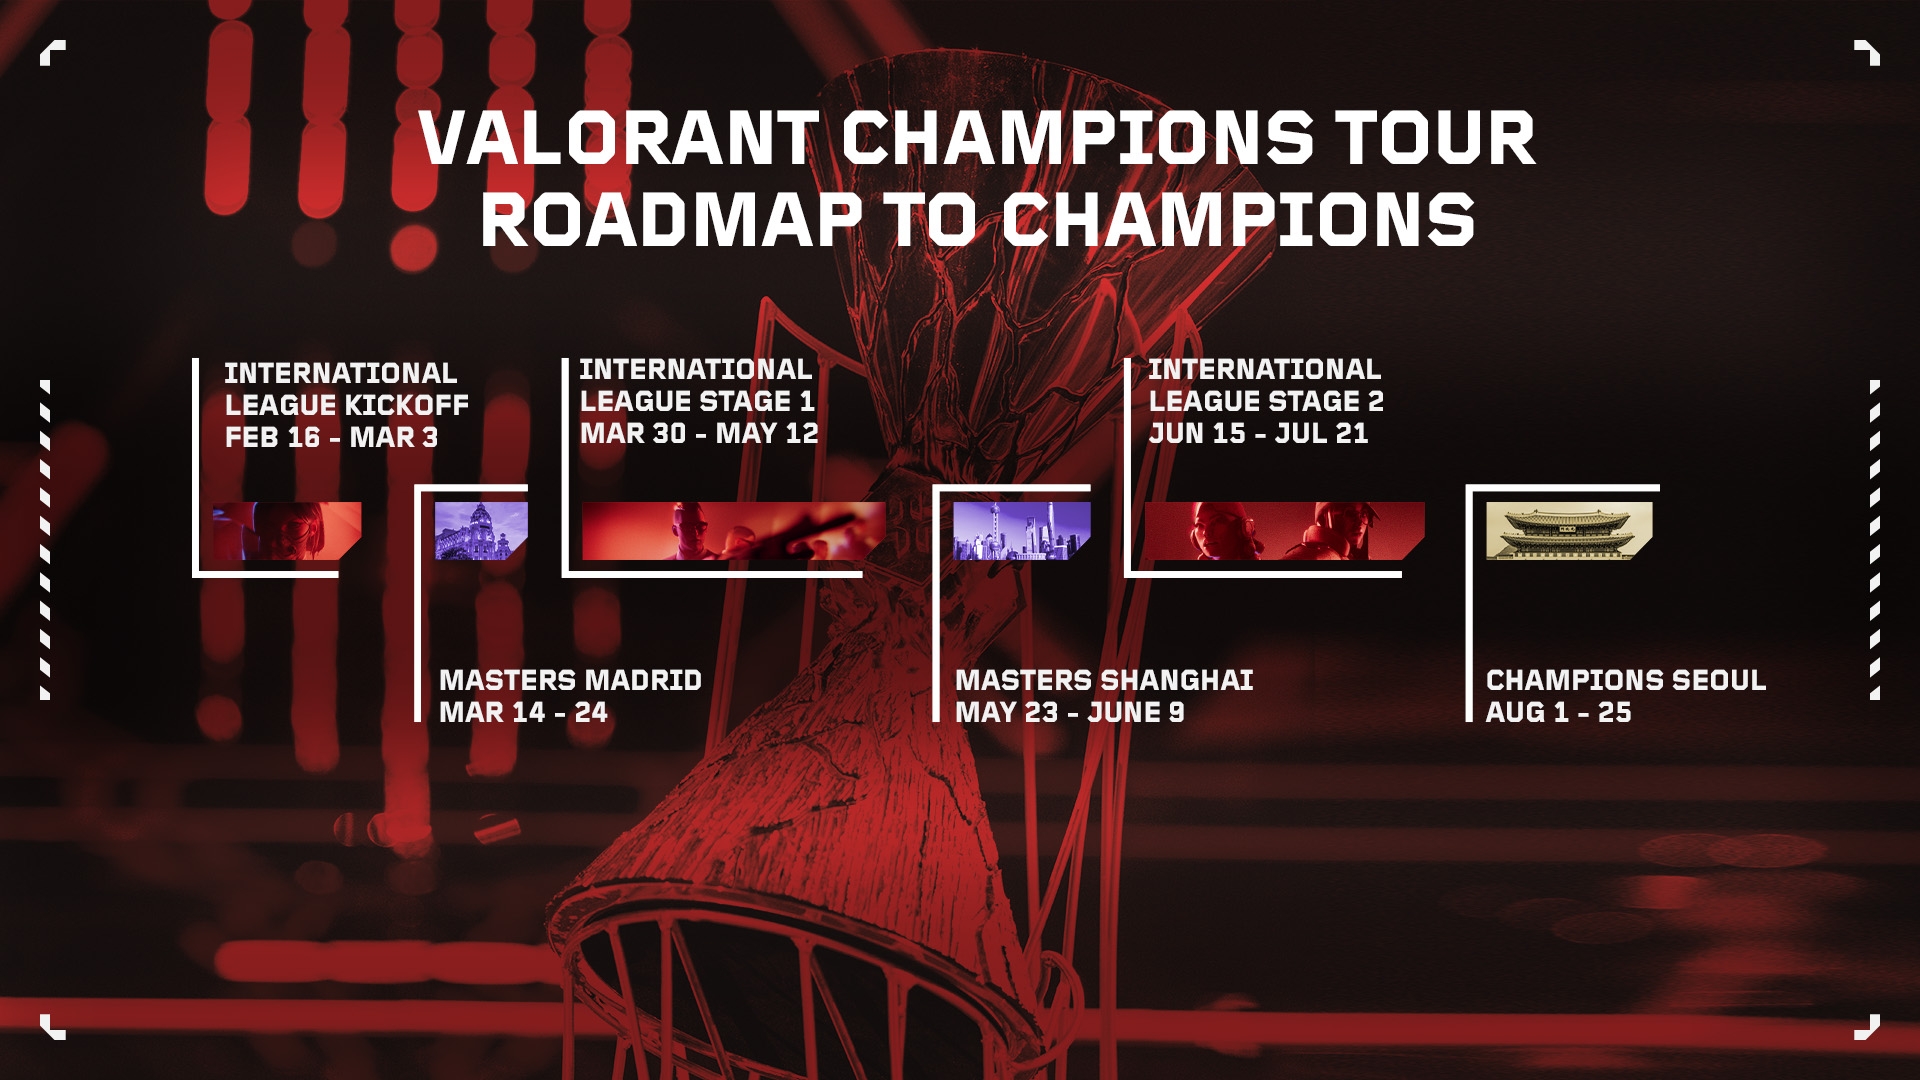 Teams strategize in Valorant Champions 2024 with the upgraded championship point system, eyeing qualification for the prestigious Seoul-based Valorant World Championship.